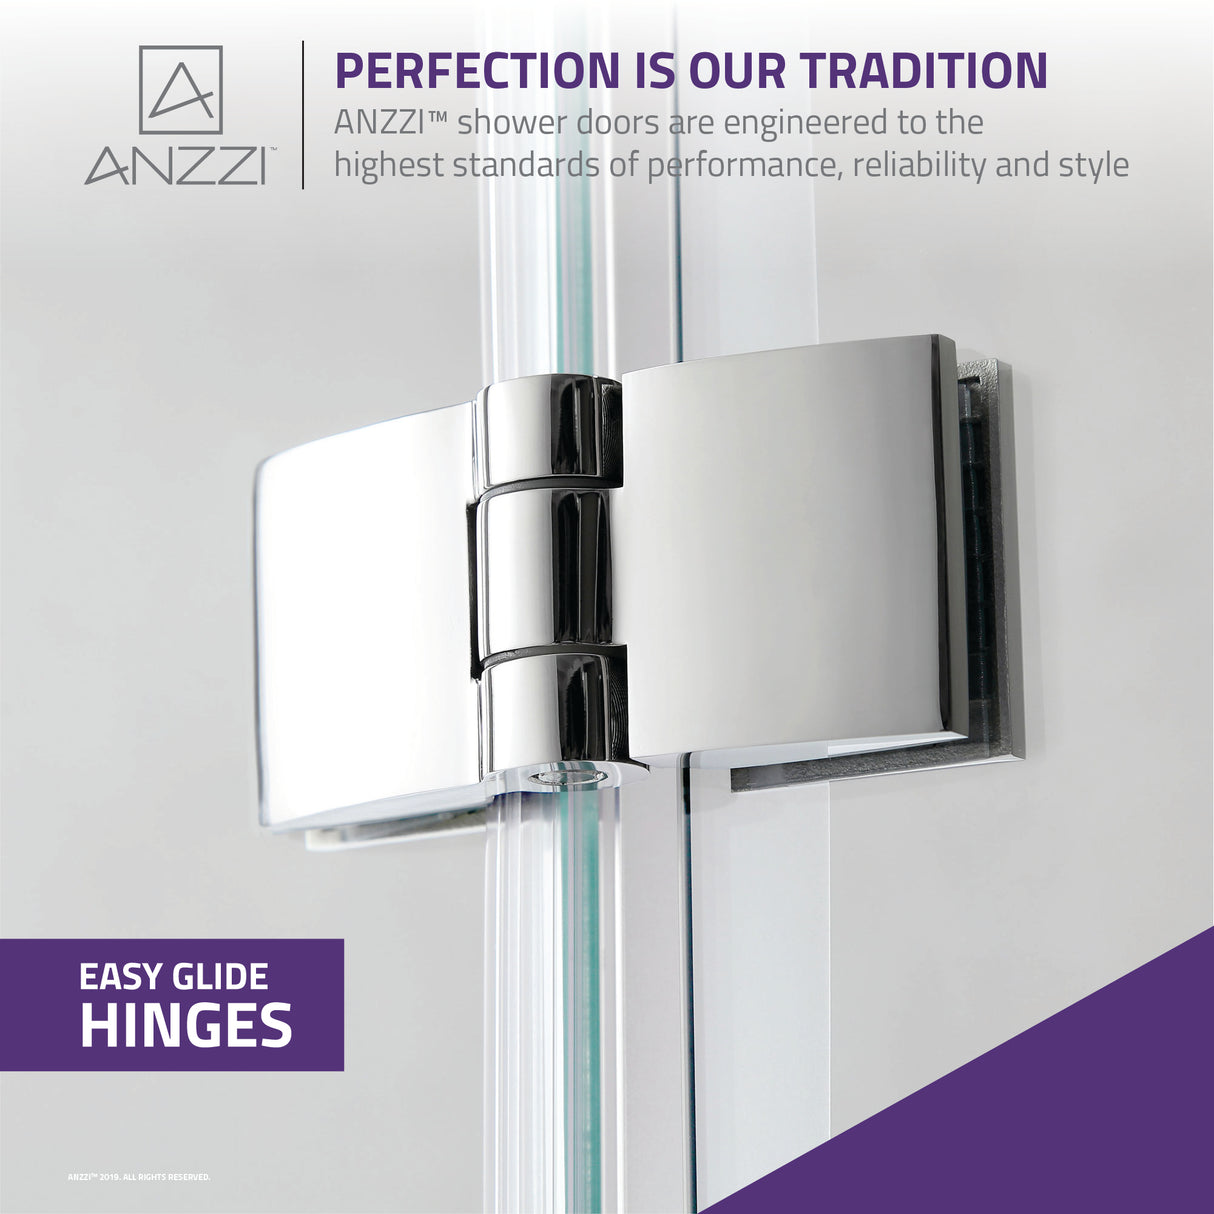 ANZZI SD-AZ8076-01CHR Series 48 in. by 58 in. Frameless Hinged Tub Door in Chrome